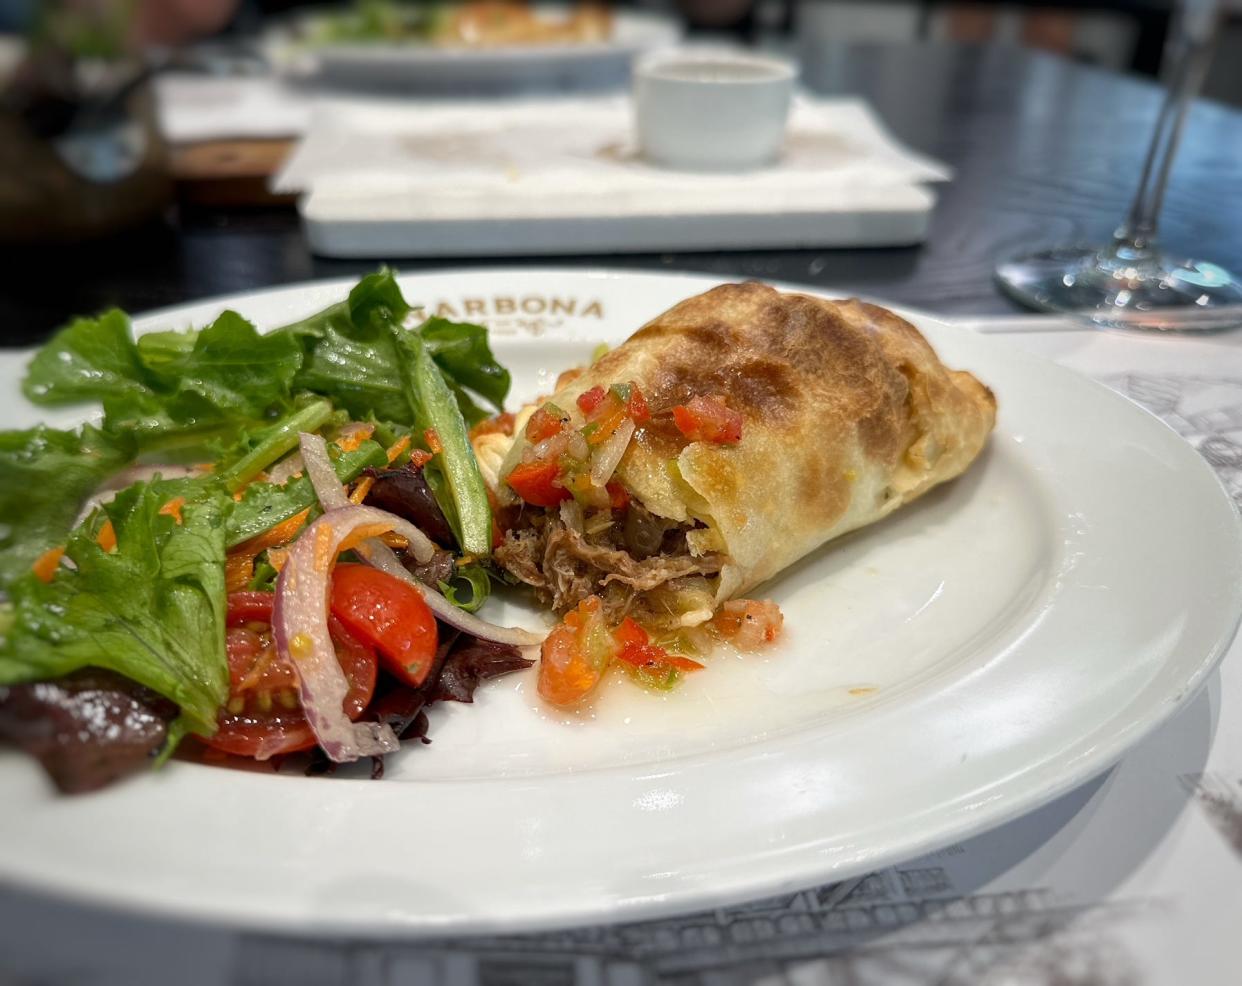 The short rib empanadas at Narbona market/café in Boca Raton are stuffed with juicy pulled beef short rib meat and served with classic Uruguayan salsa criolla.